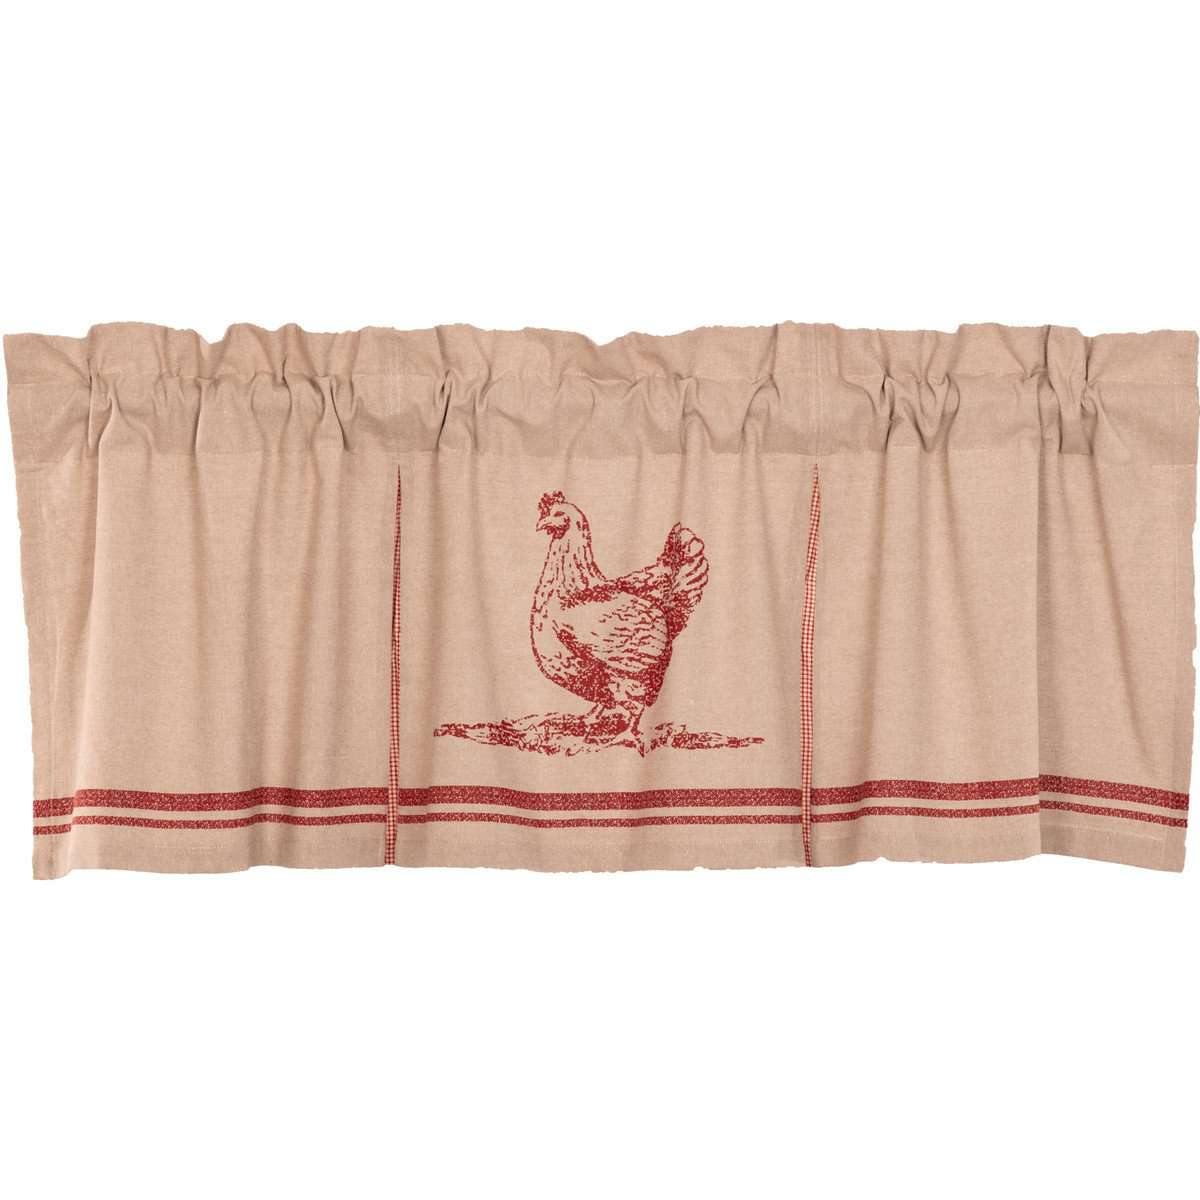 Sawyer Mill Red Chicken Valance Pleated Curtain 20x60 VHC Brands - The Fox Decor